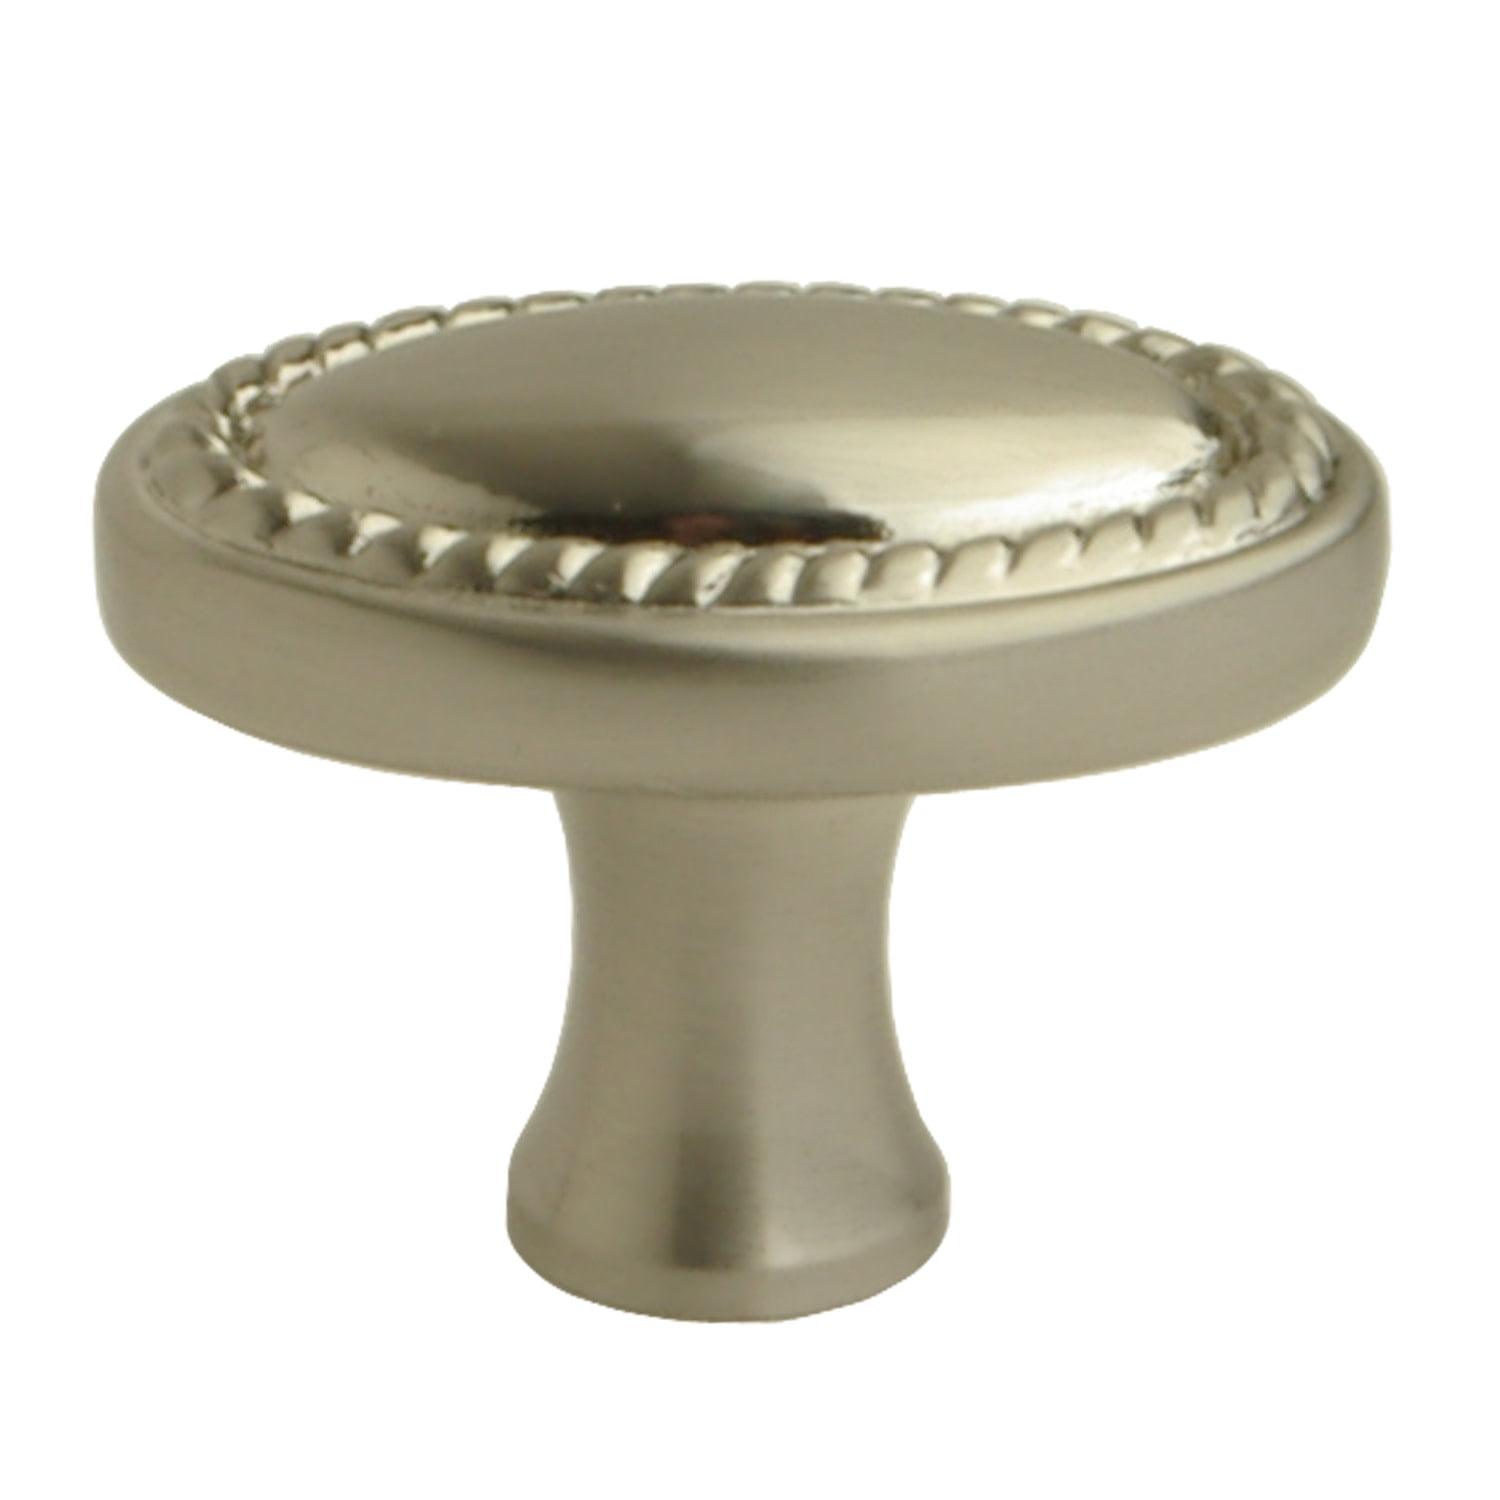 10 Each Hickory Hardware P3002-RI-10B Refined Rustic Collection Knob Iron 1-1//4 Inch Diameter